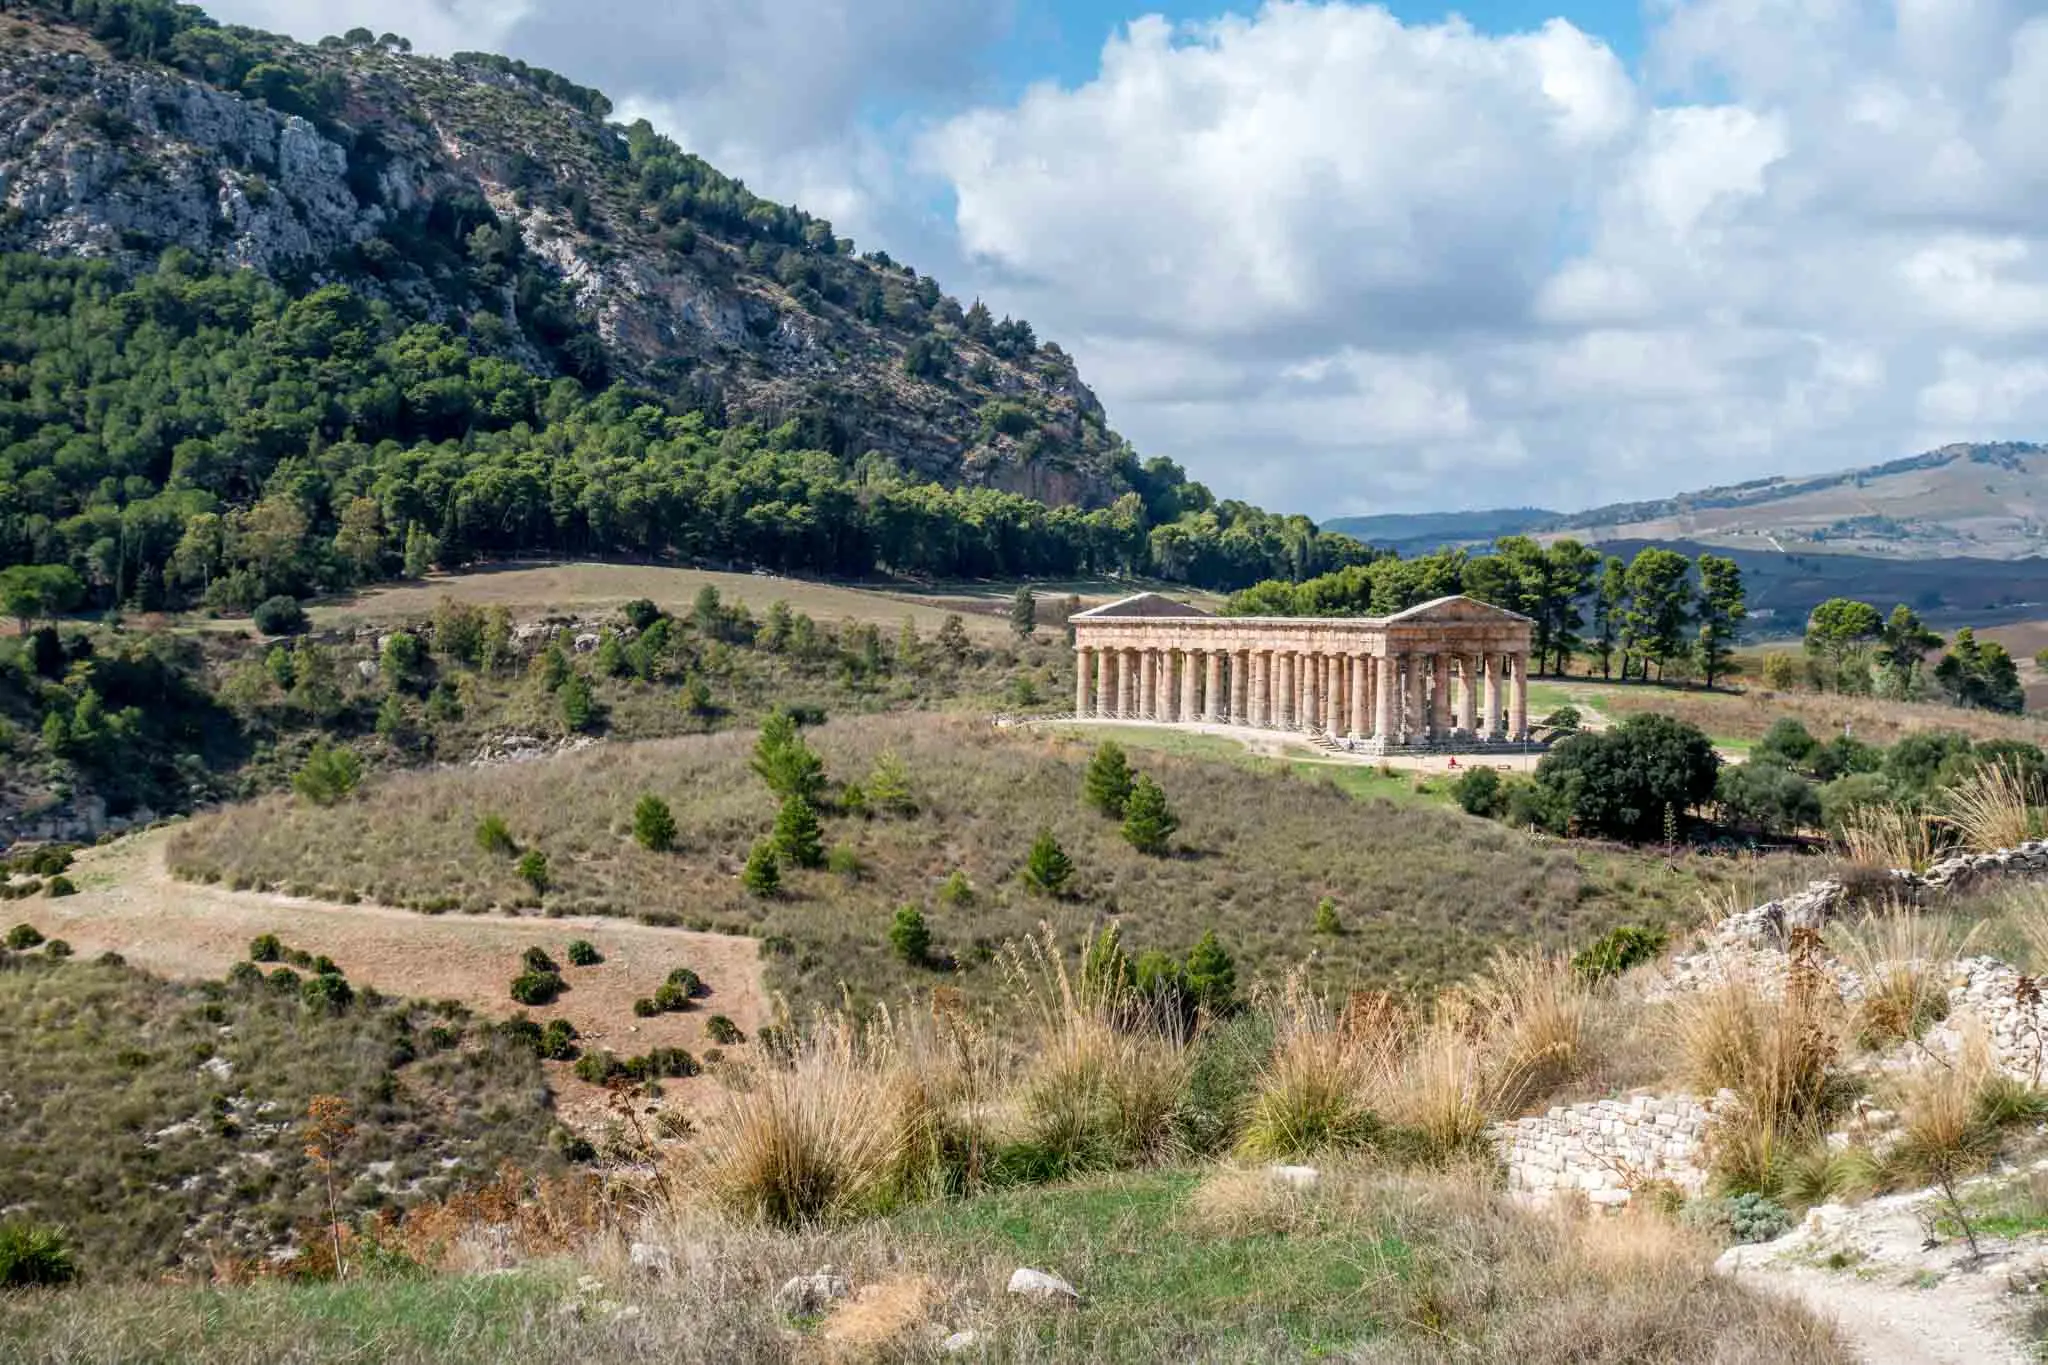 The ancient Doric Temple at Segesta is one of the highlights to see on a Sicily road trip